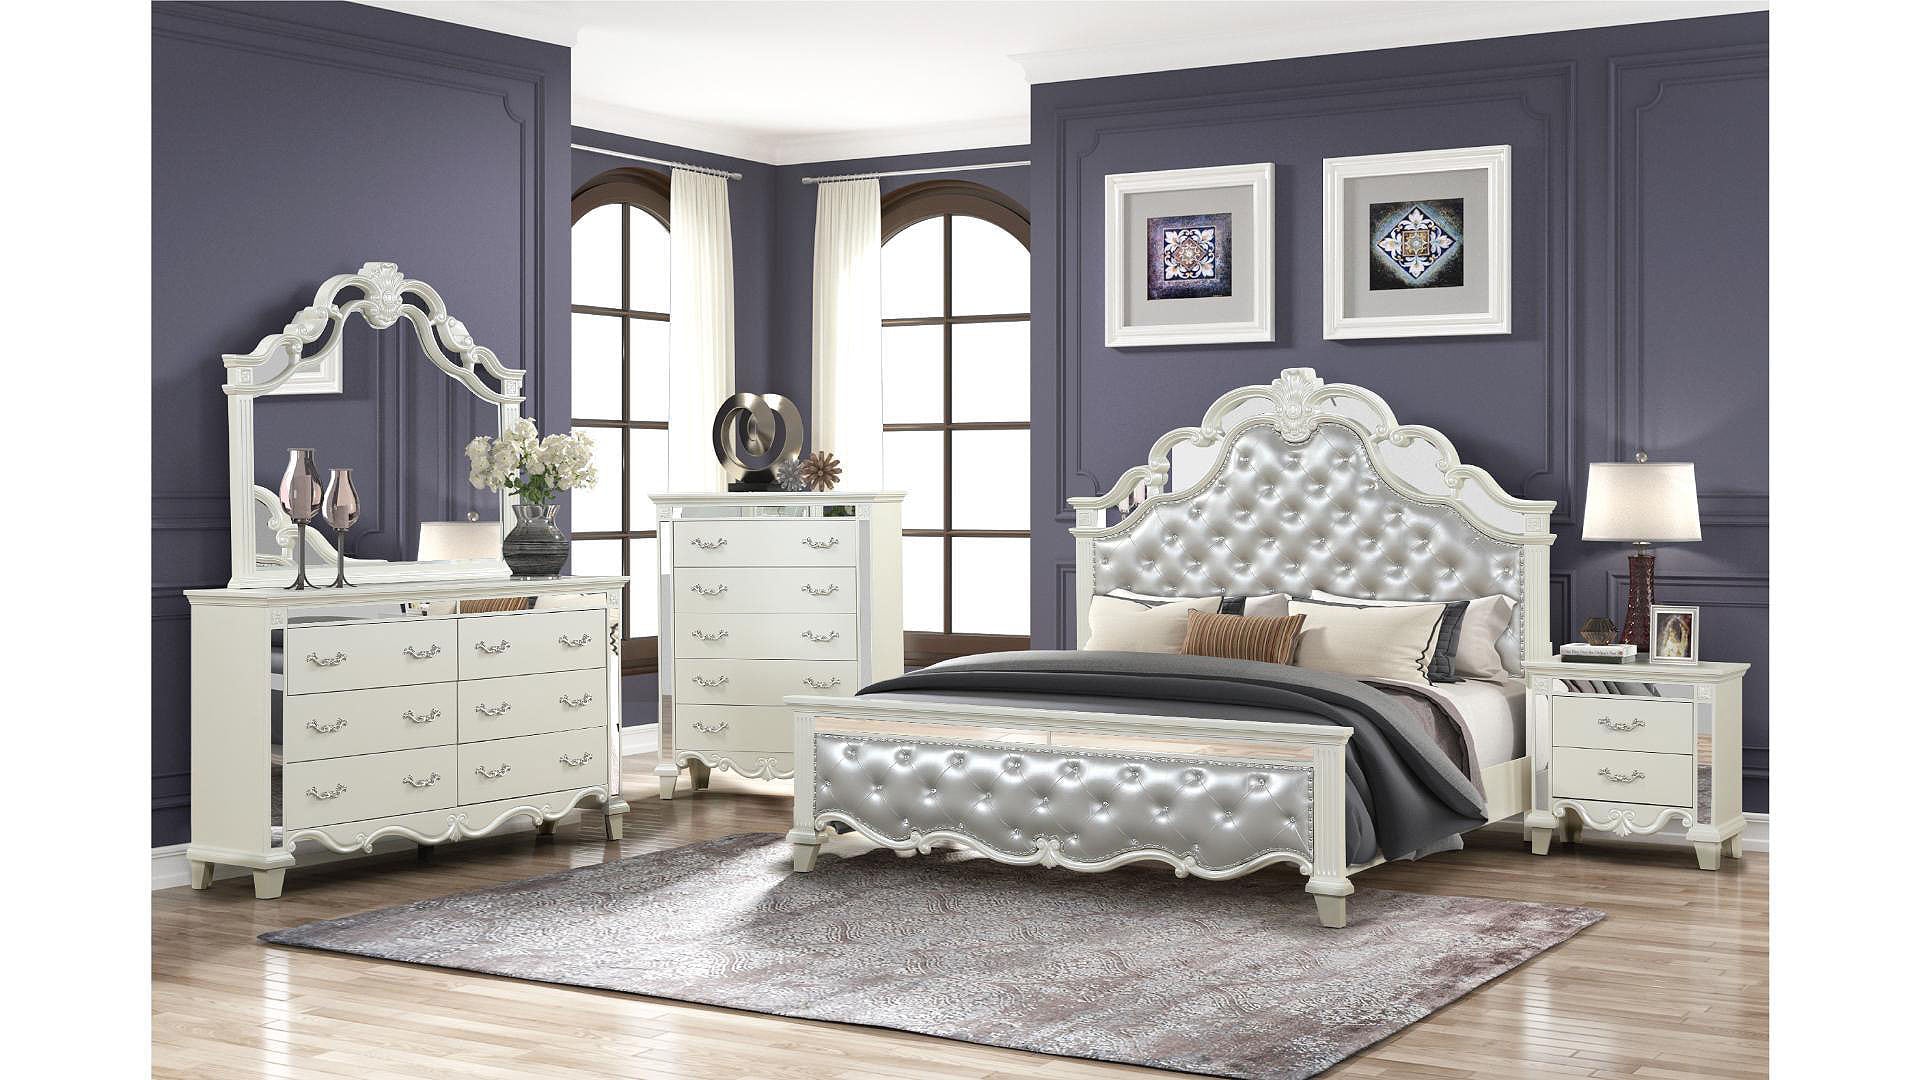 Milan Bedroom collection 1381